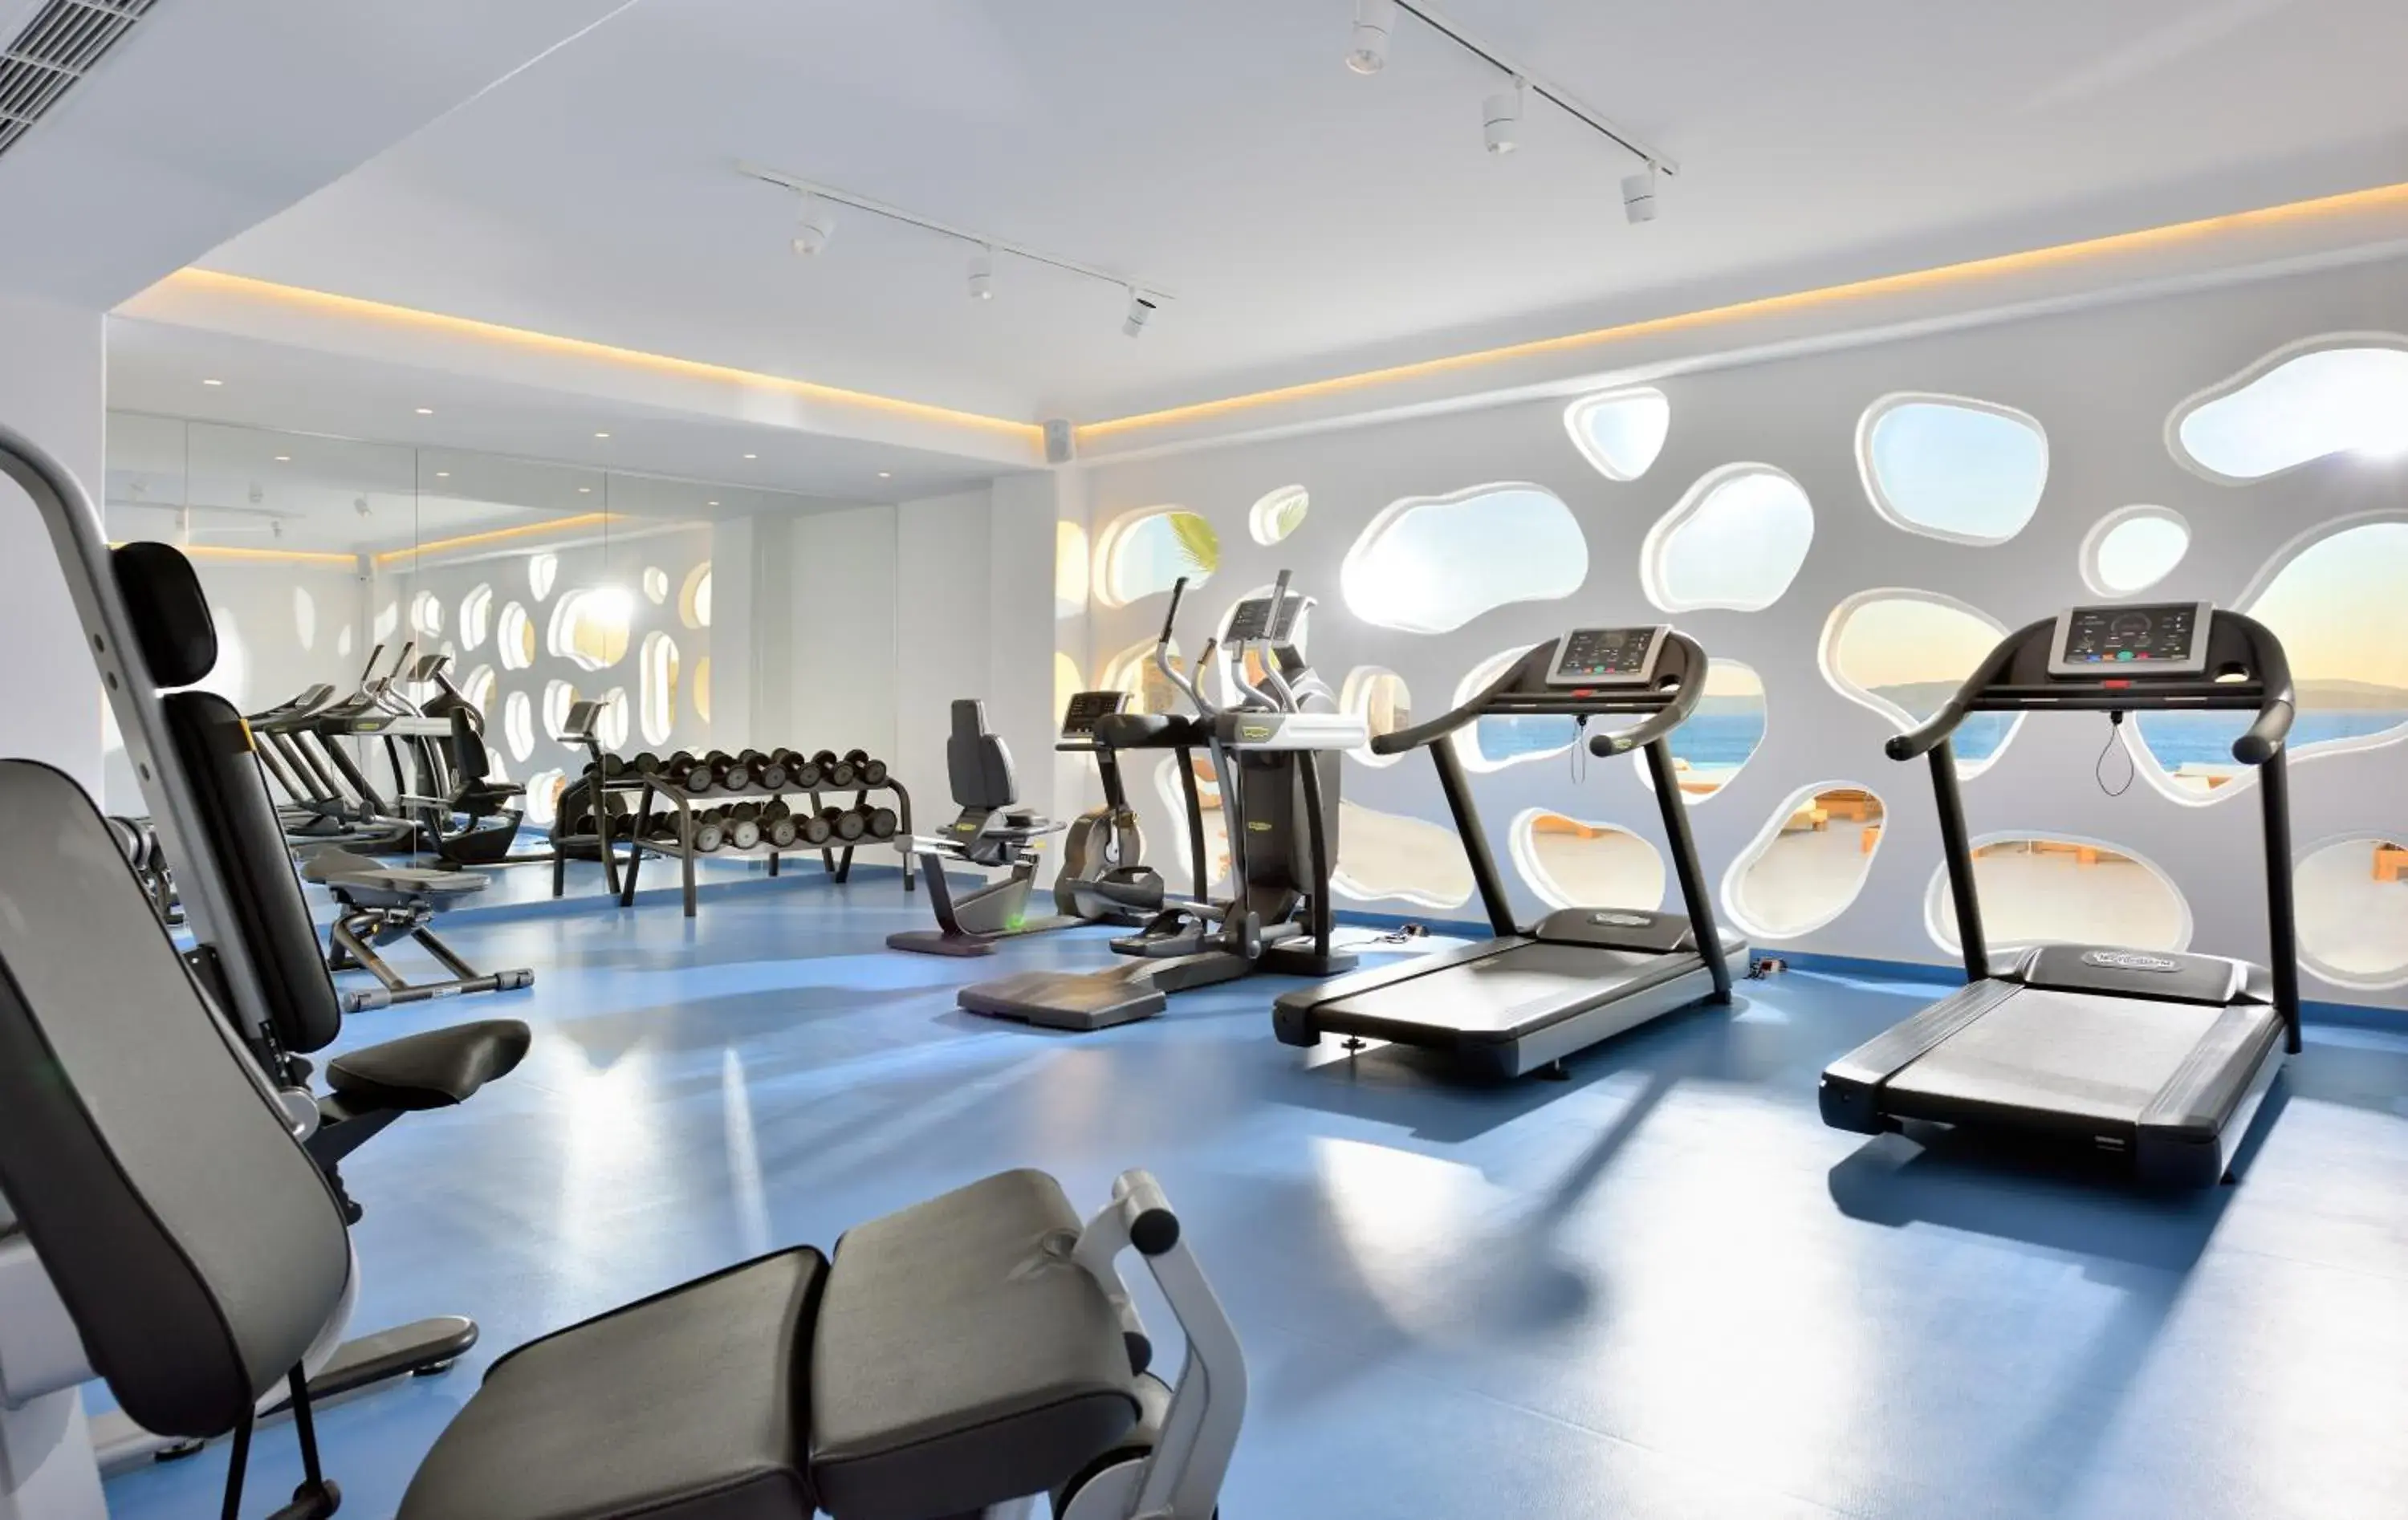 Fitness centre/facilities, Fitness Center/Facilities in Anax Resort and Spa